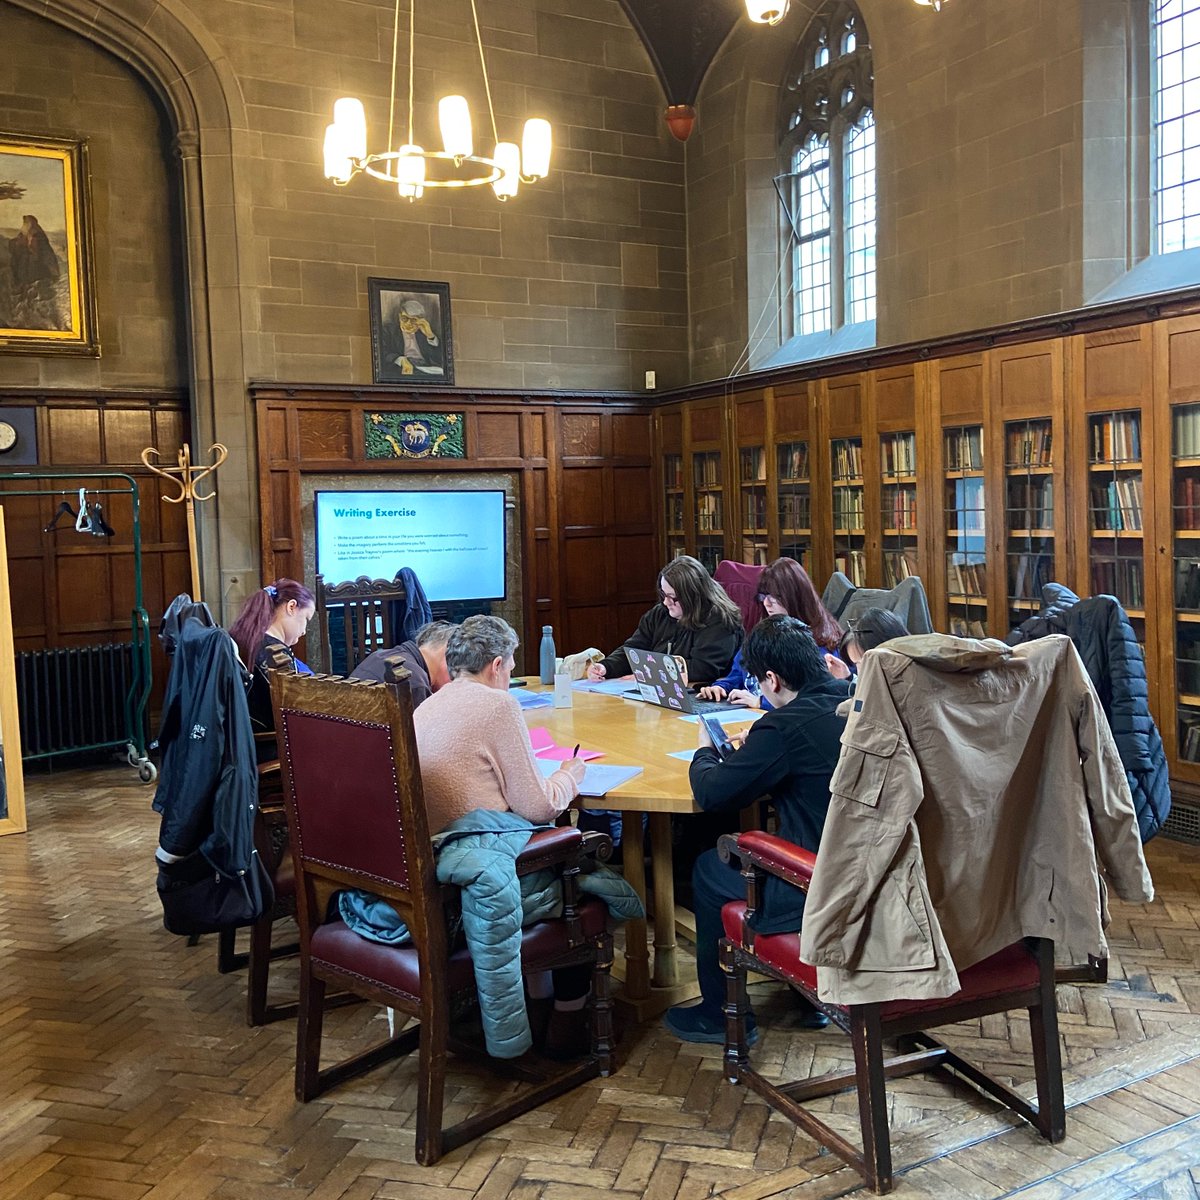 A great session with the new Poetry Writing Workshops we now offer at Volition. This week’s introduction to poetry looked at a poem by Jessica Traynor poets look at home writing away in the cathedral’s library! #poem #poetrylovers #volunteers 🖊️📝📚